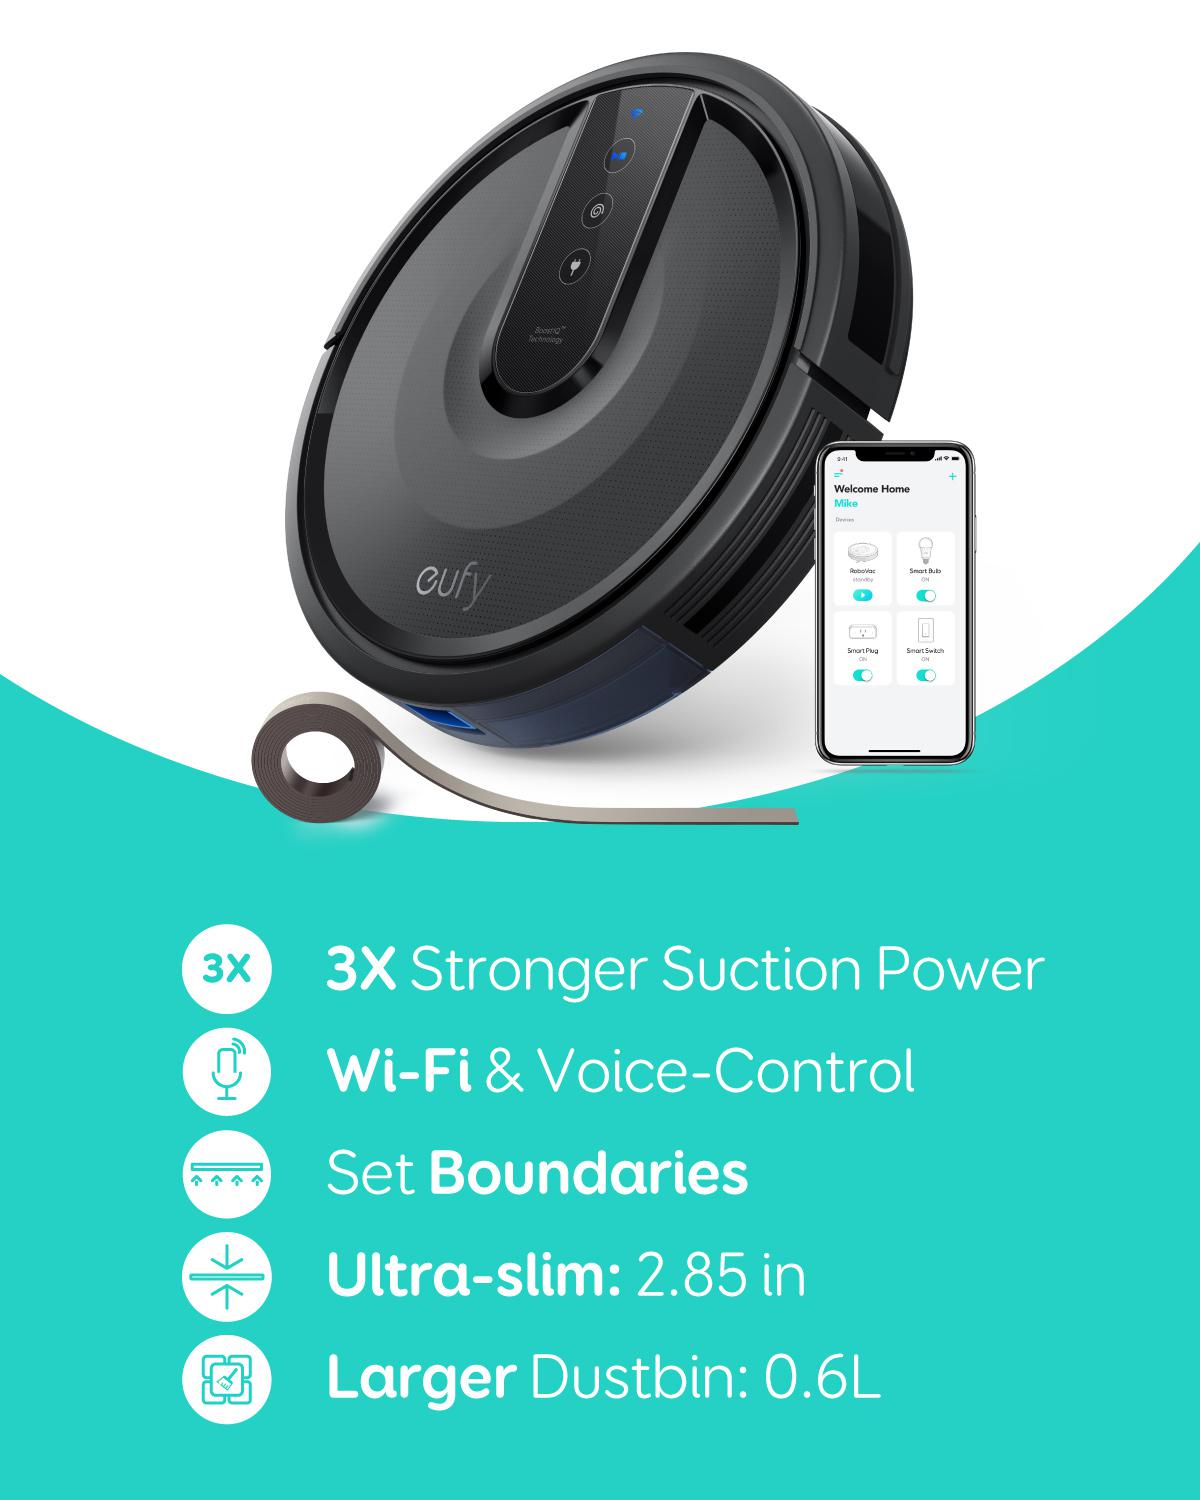 Anker eufy RoboVac 35C Wi-Fi Connected Robot Vacuum - image 2 of 9